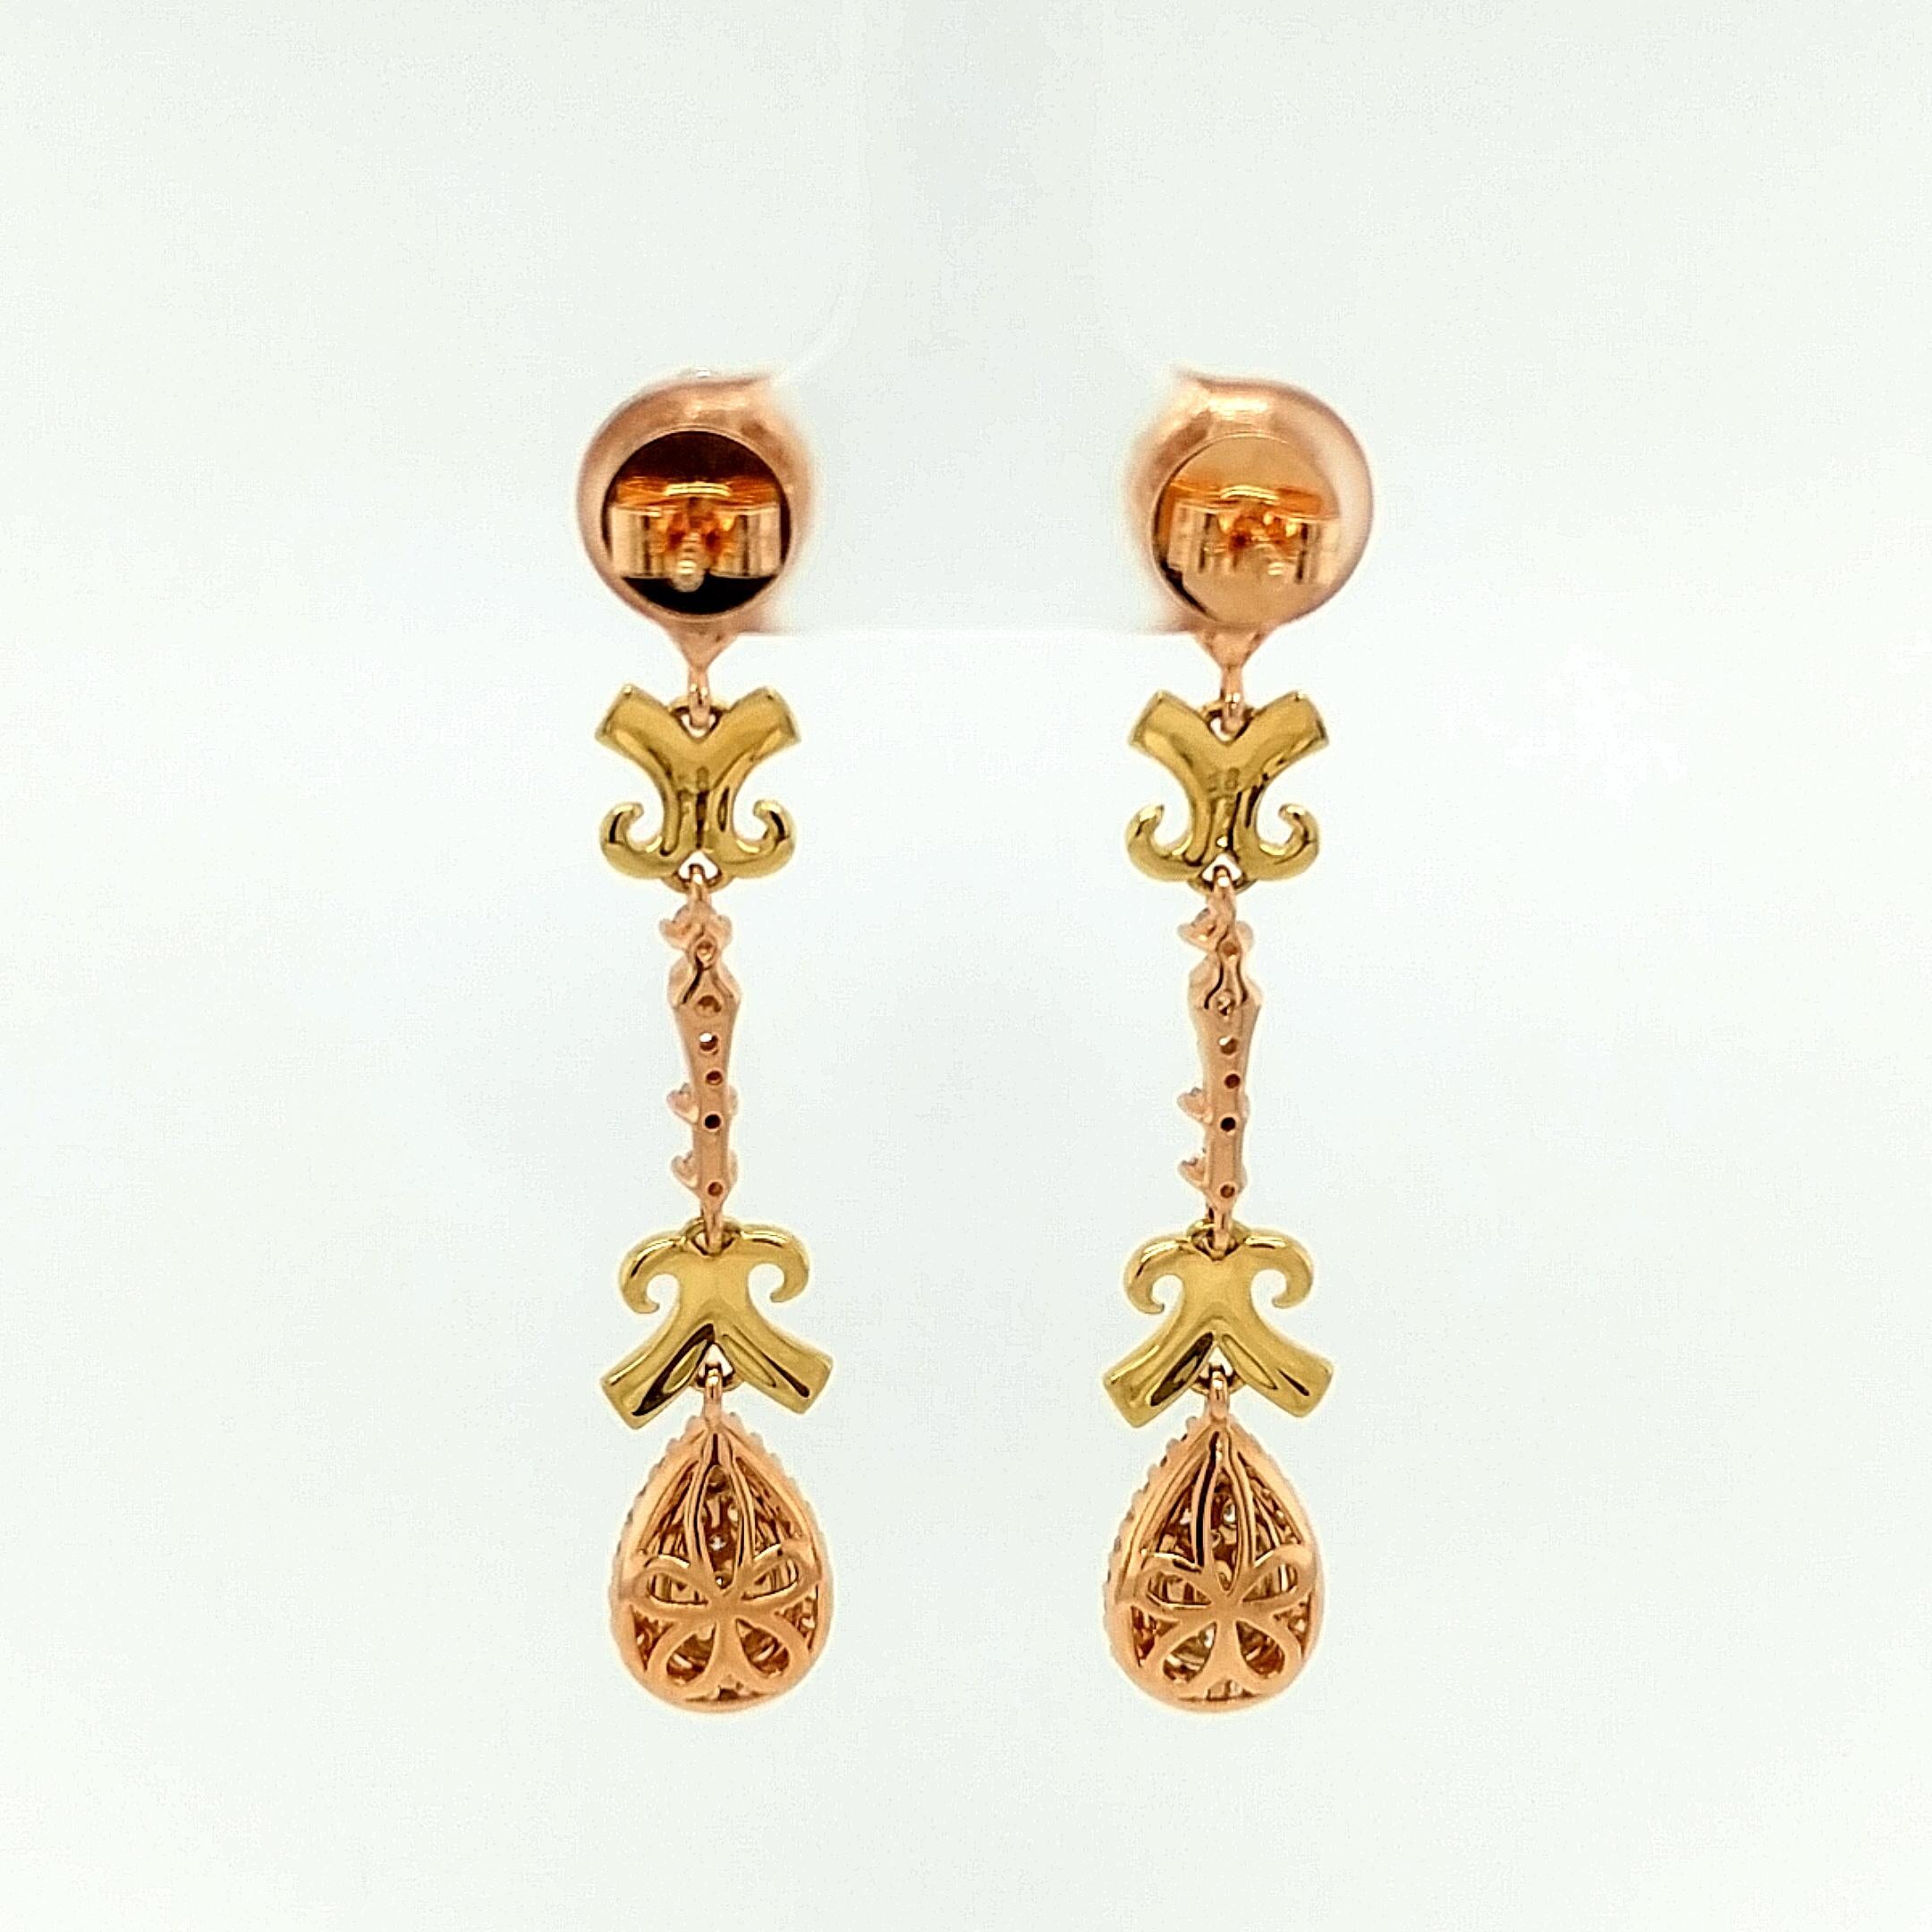 Contemporary 18Kt Tri Color Gold 1.30 Carat Diamond Chandelier Earrings For Sale